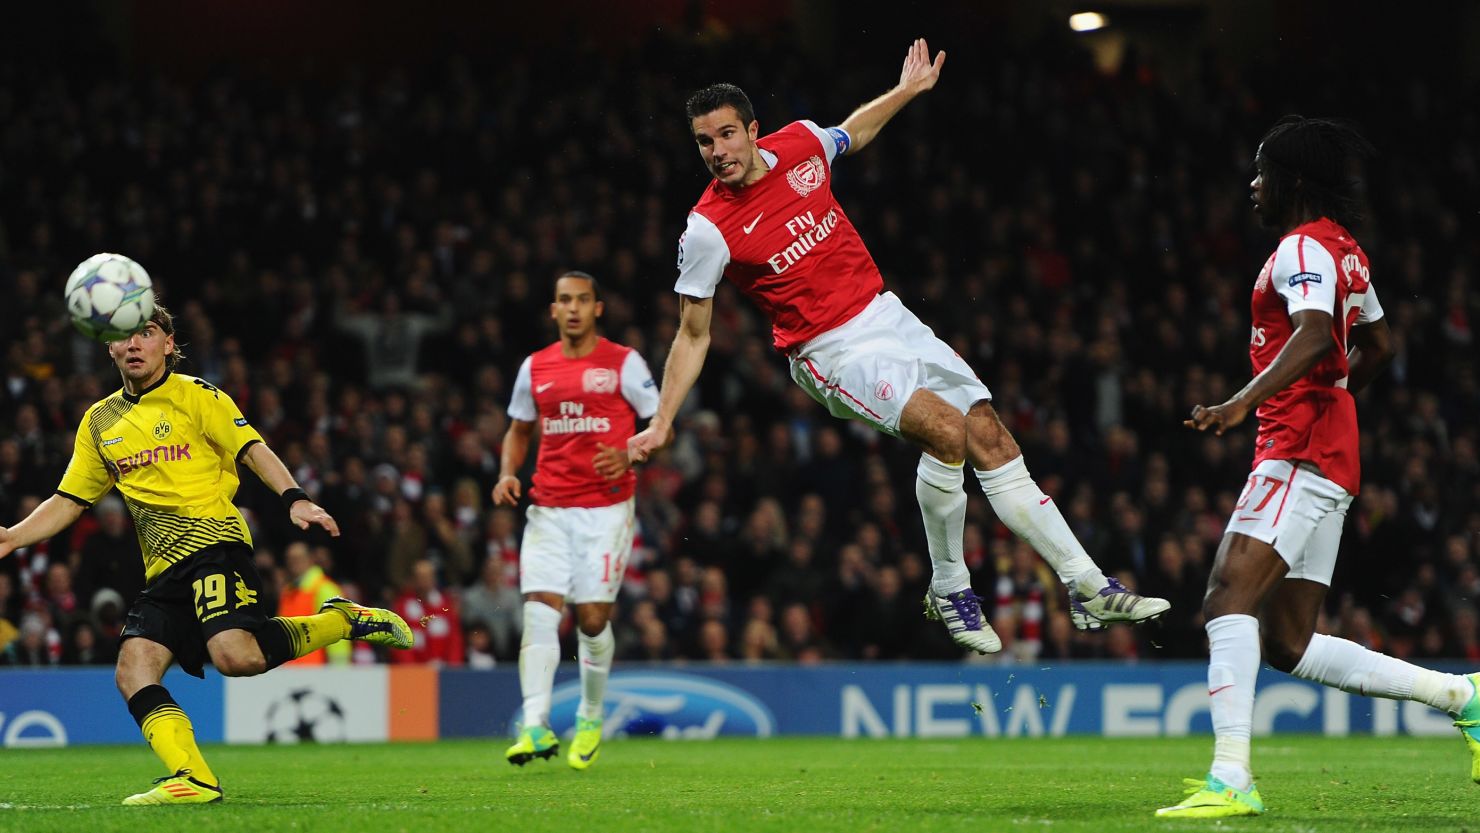 Robin van Persie flies through the air to head home his opening goal as Arsenal secured their place in the last 16.